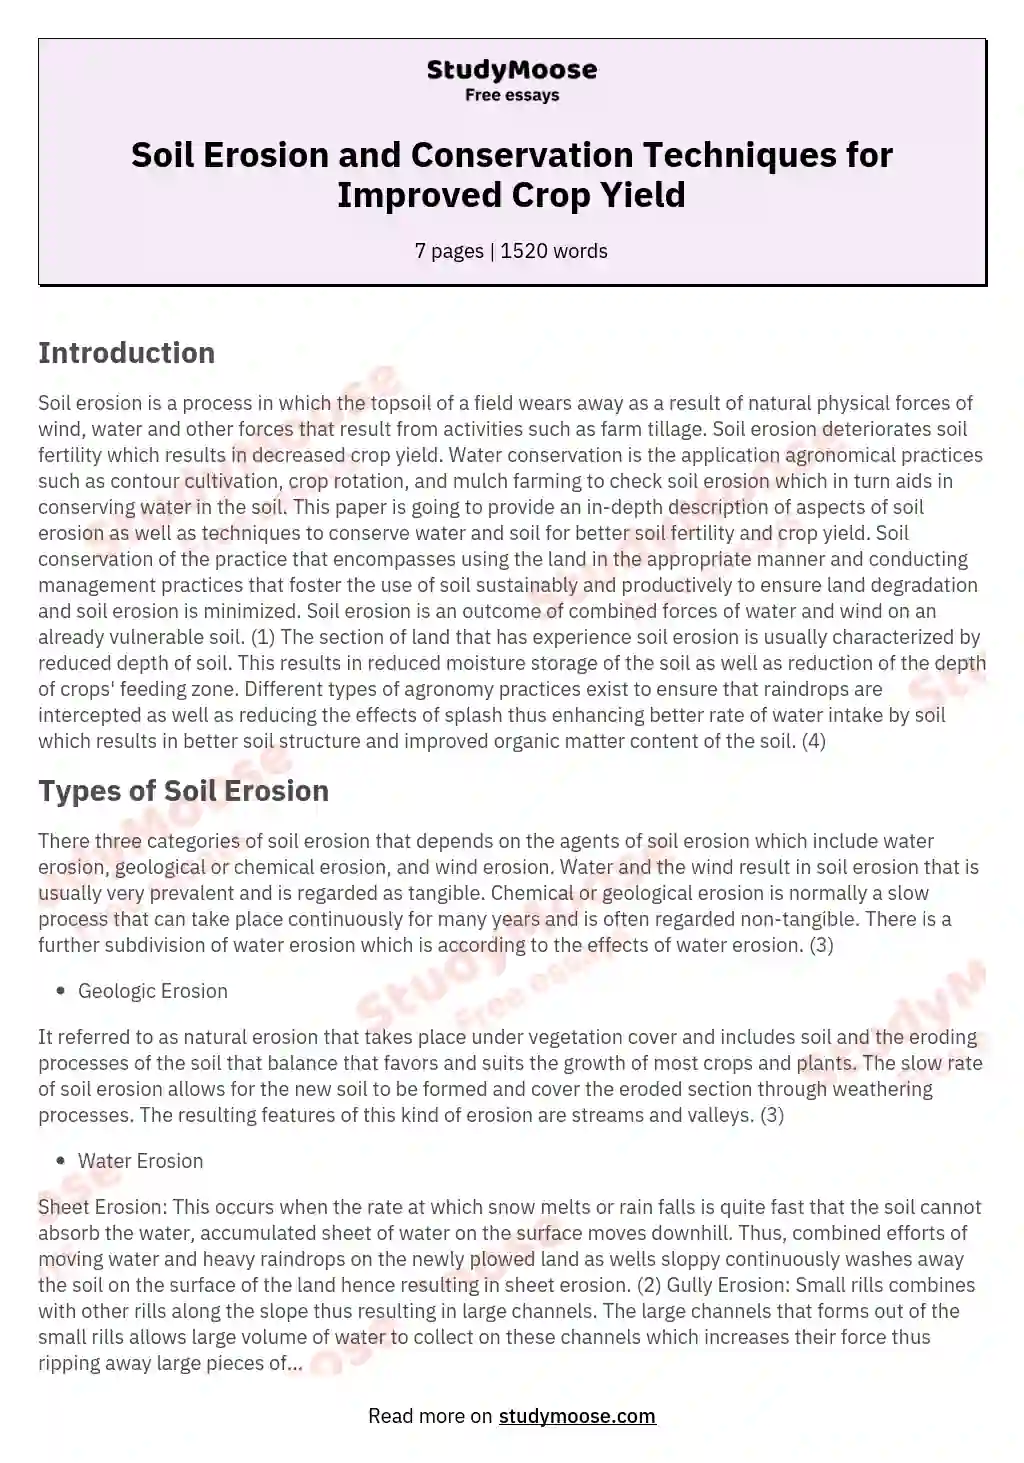 Soil Erosion and Conservation Techniques for Improved Crop Yield essay